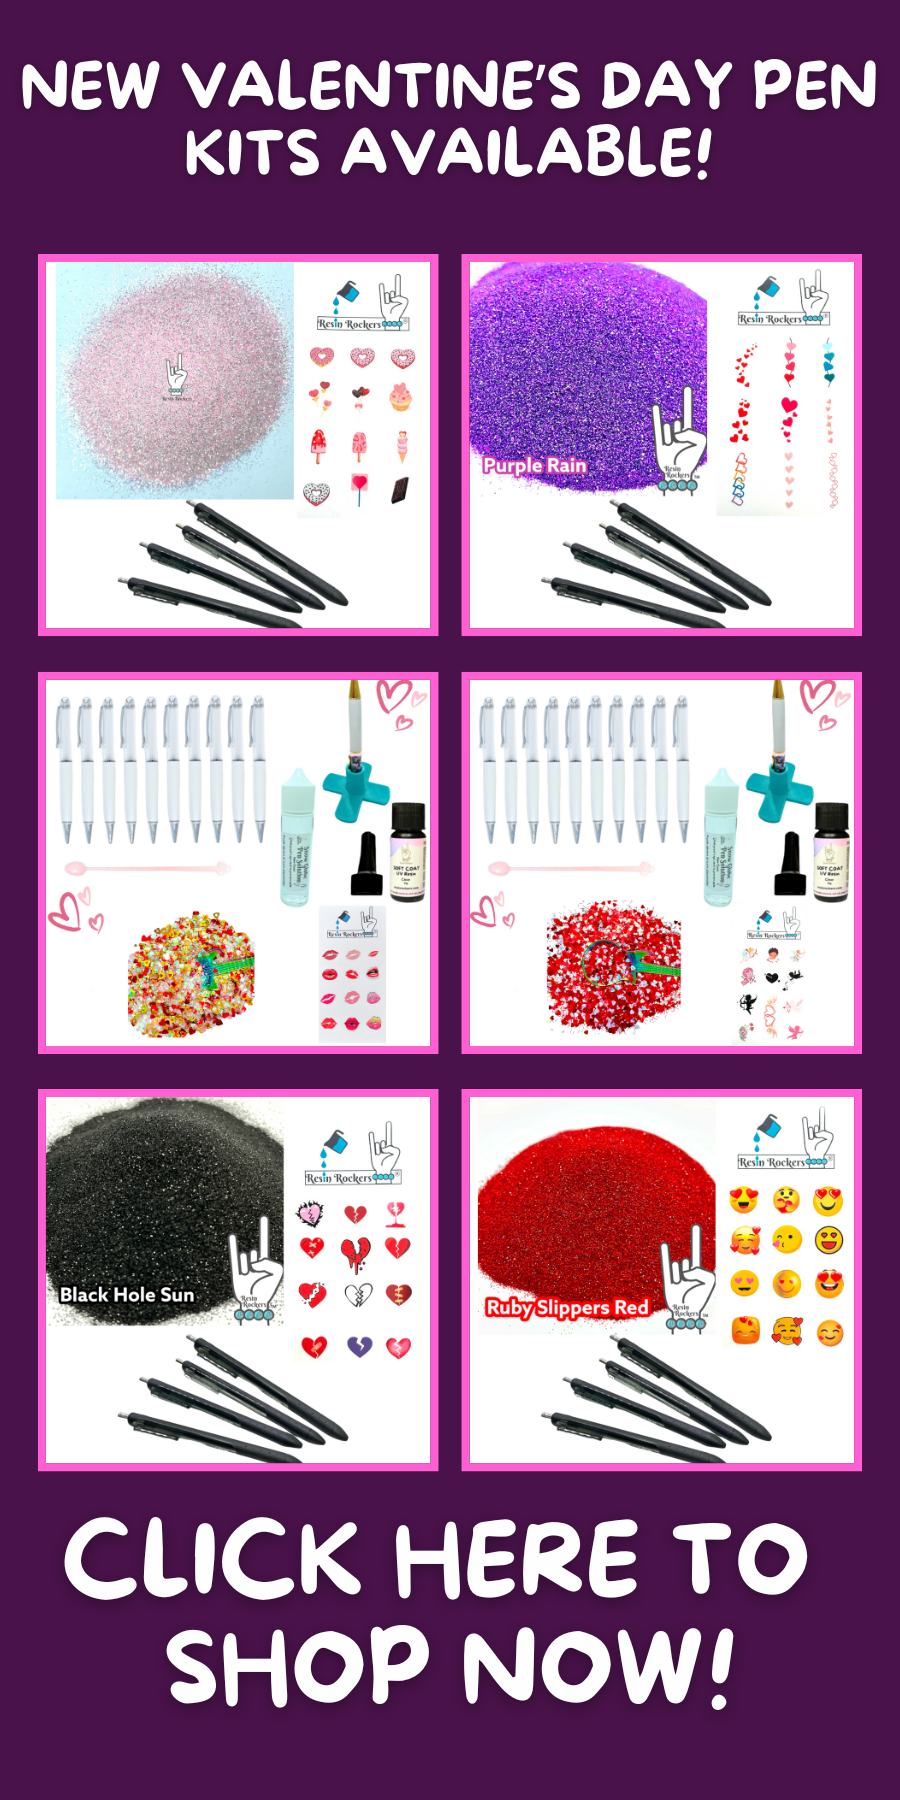 Resin Rockers® CONQUERing Jewelry Crafting Essentials Kit - Holiday Edition